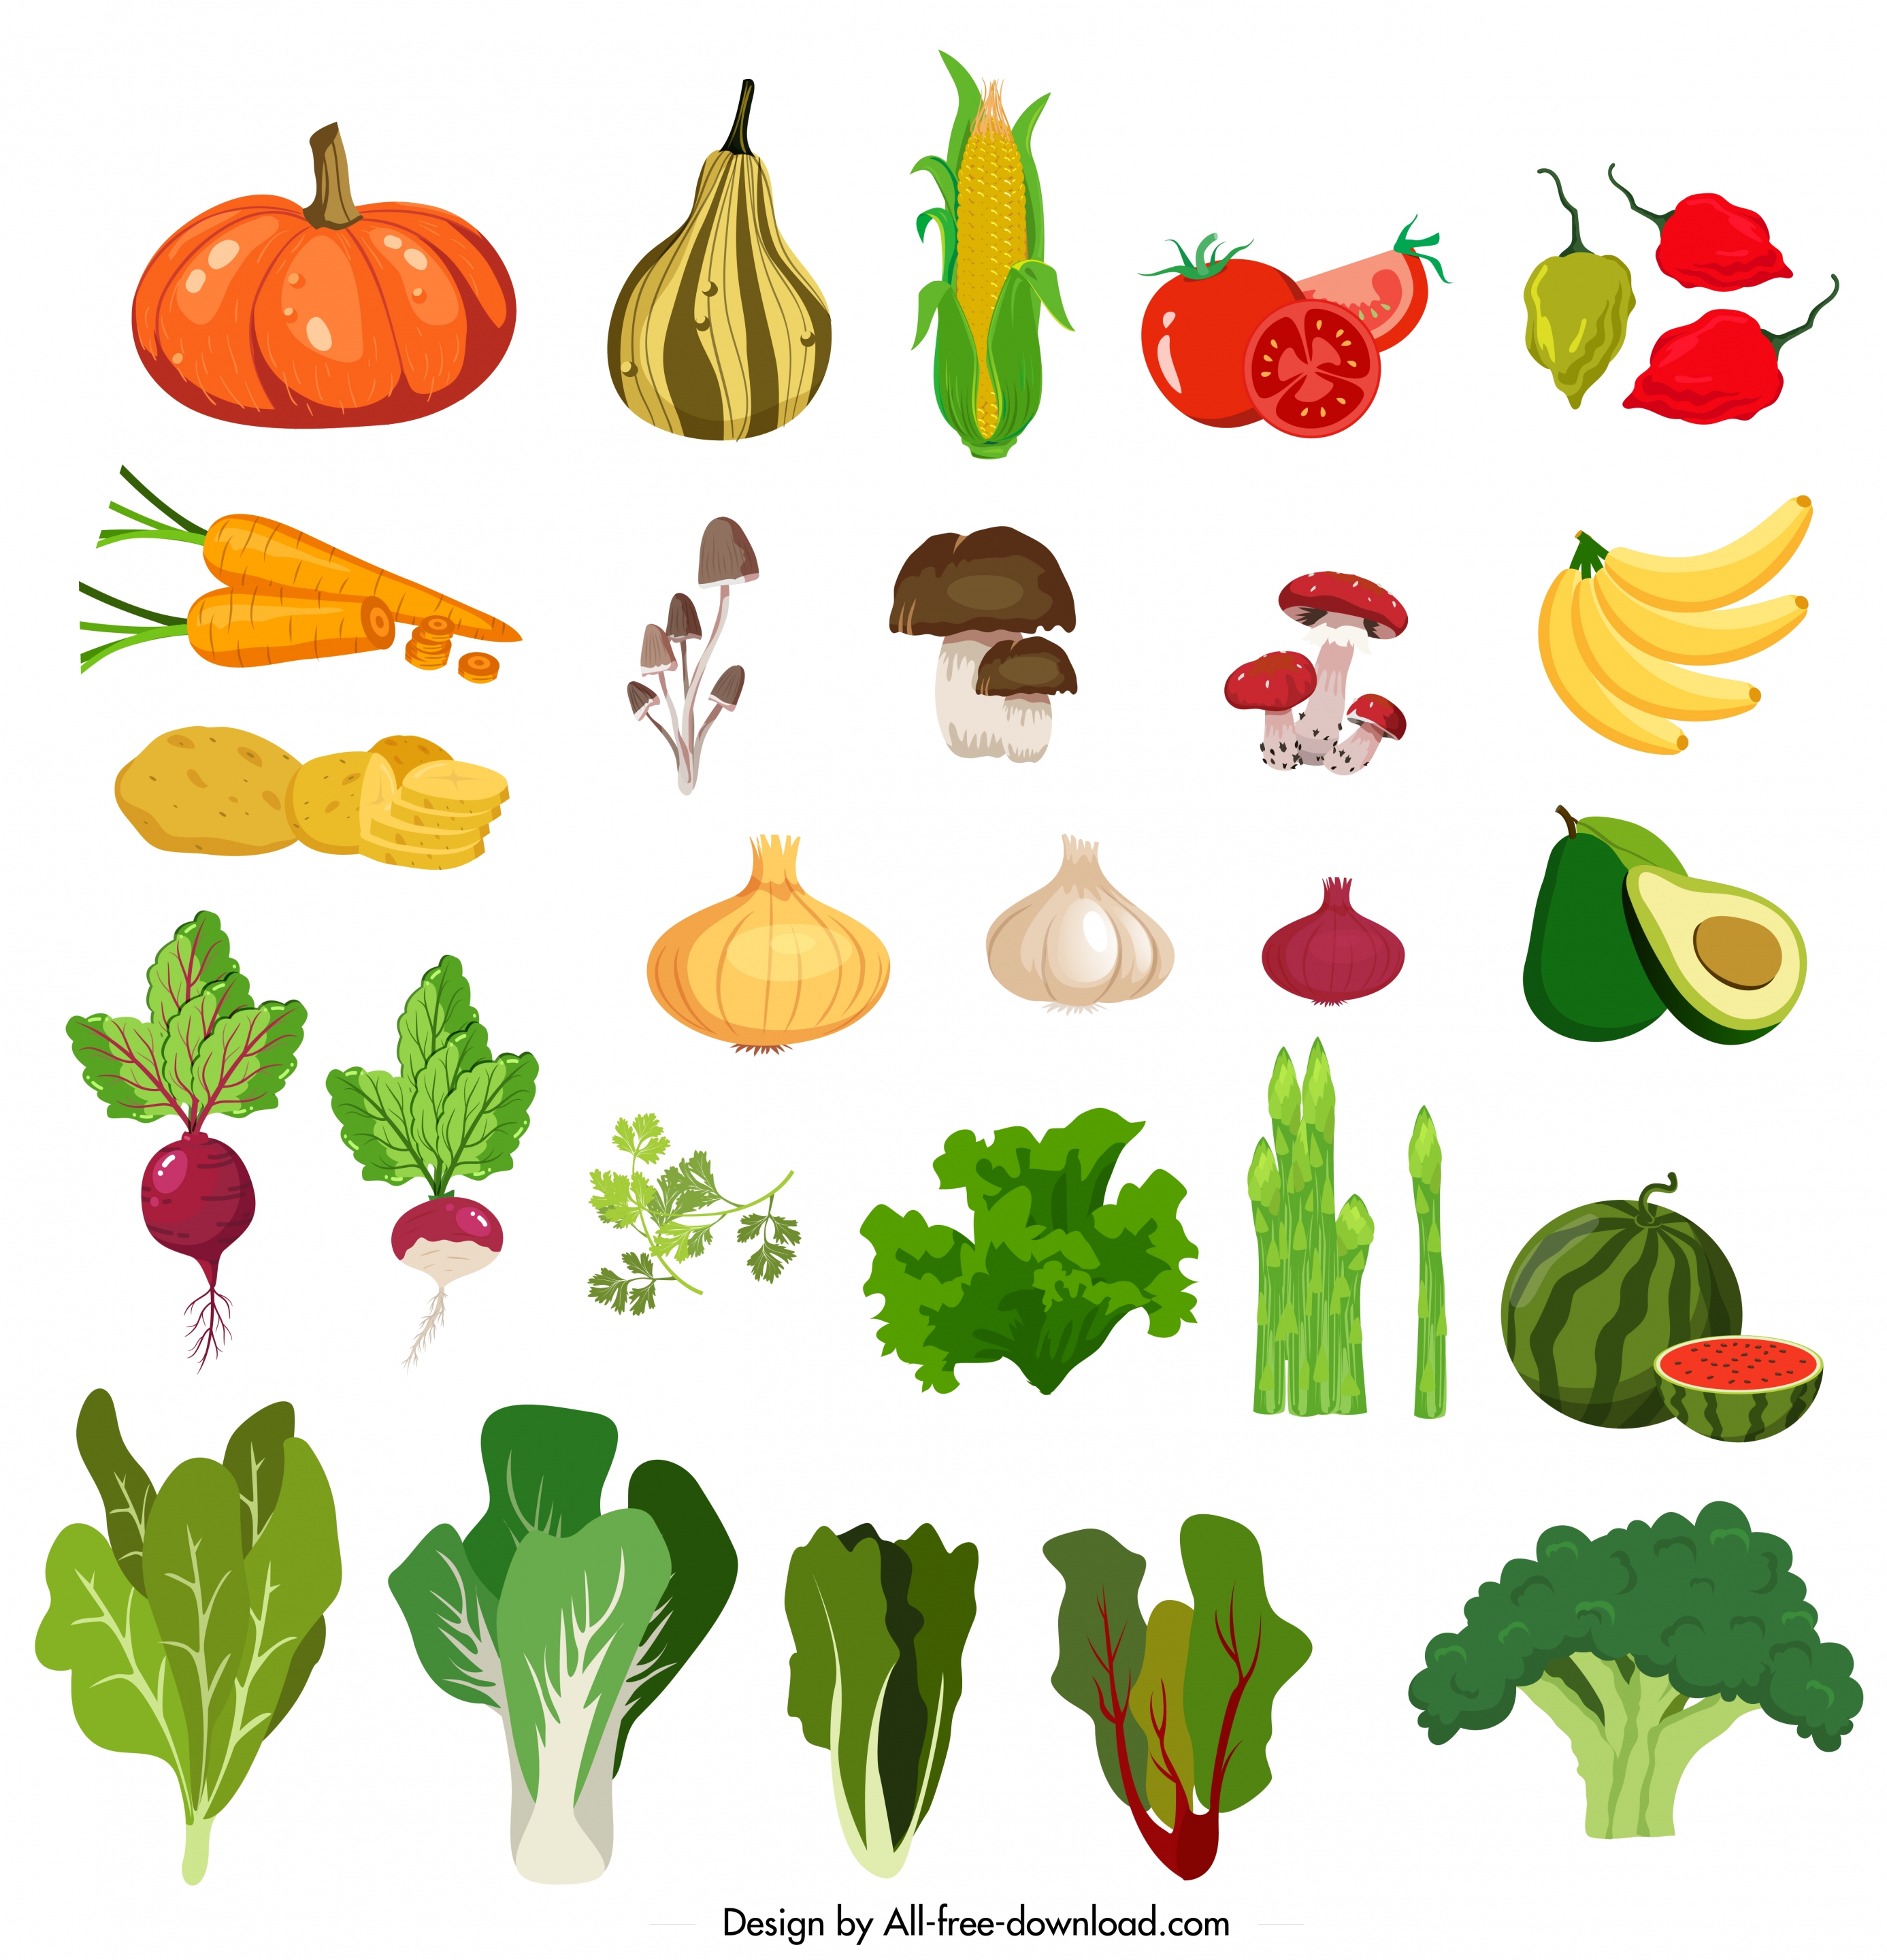 vegetables icons colorful classical design